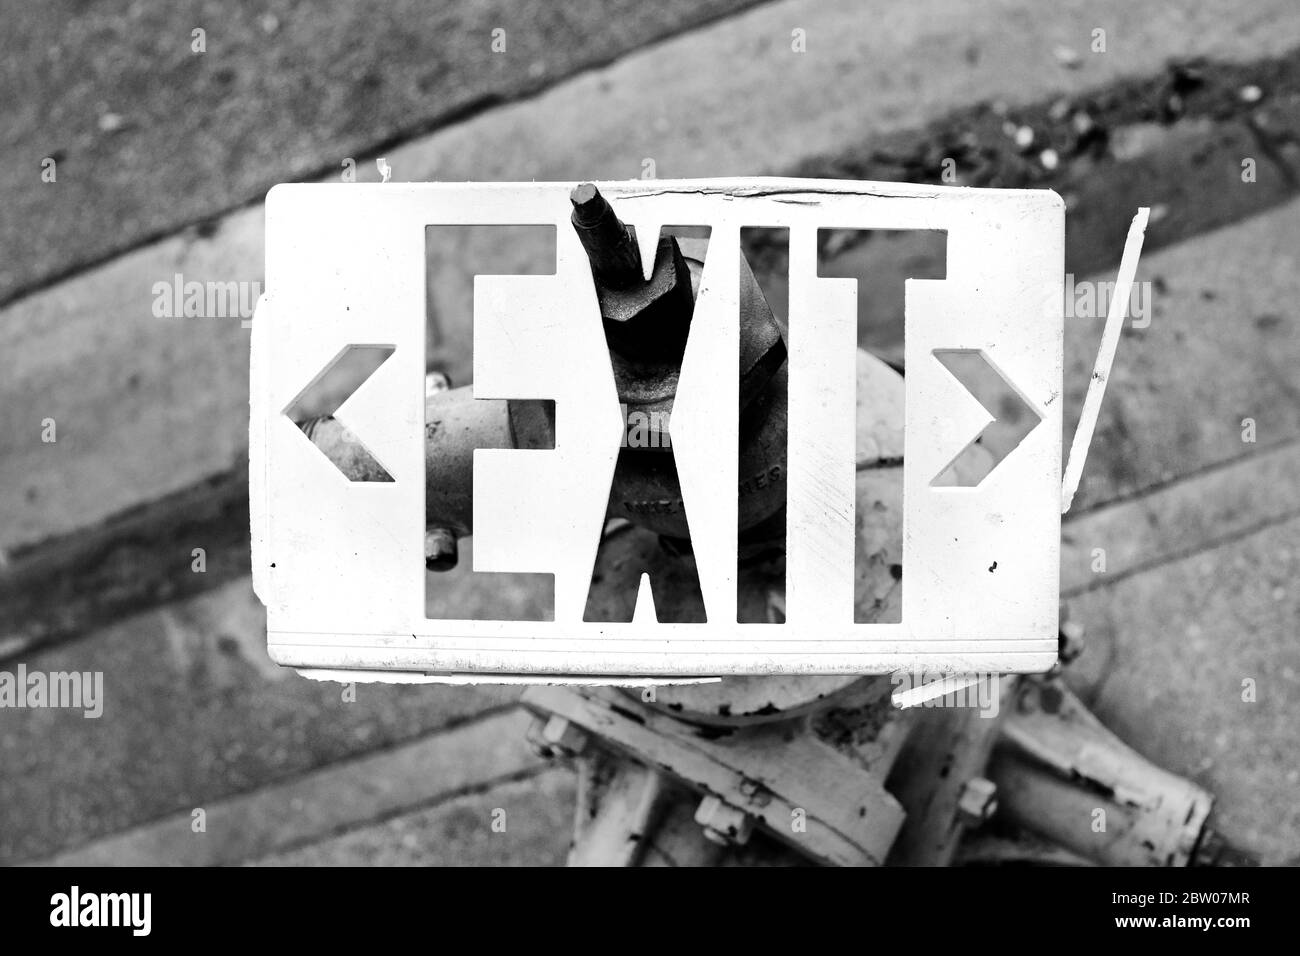 White Exit sign stuck on fire hydrant on sidewalk.  Abstract image of broken Exit sign in black & white horizontal photograph. Stock Photo